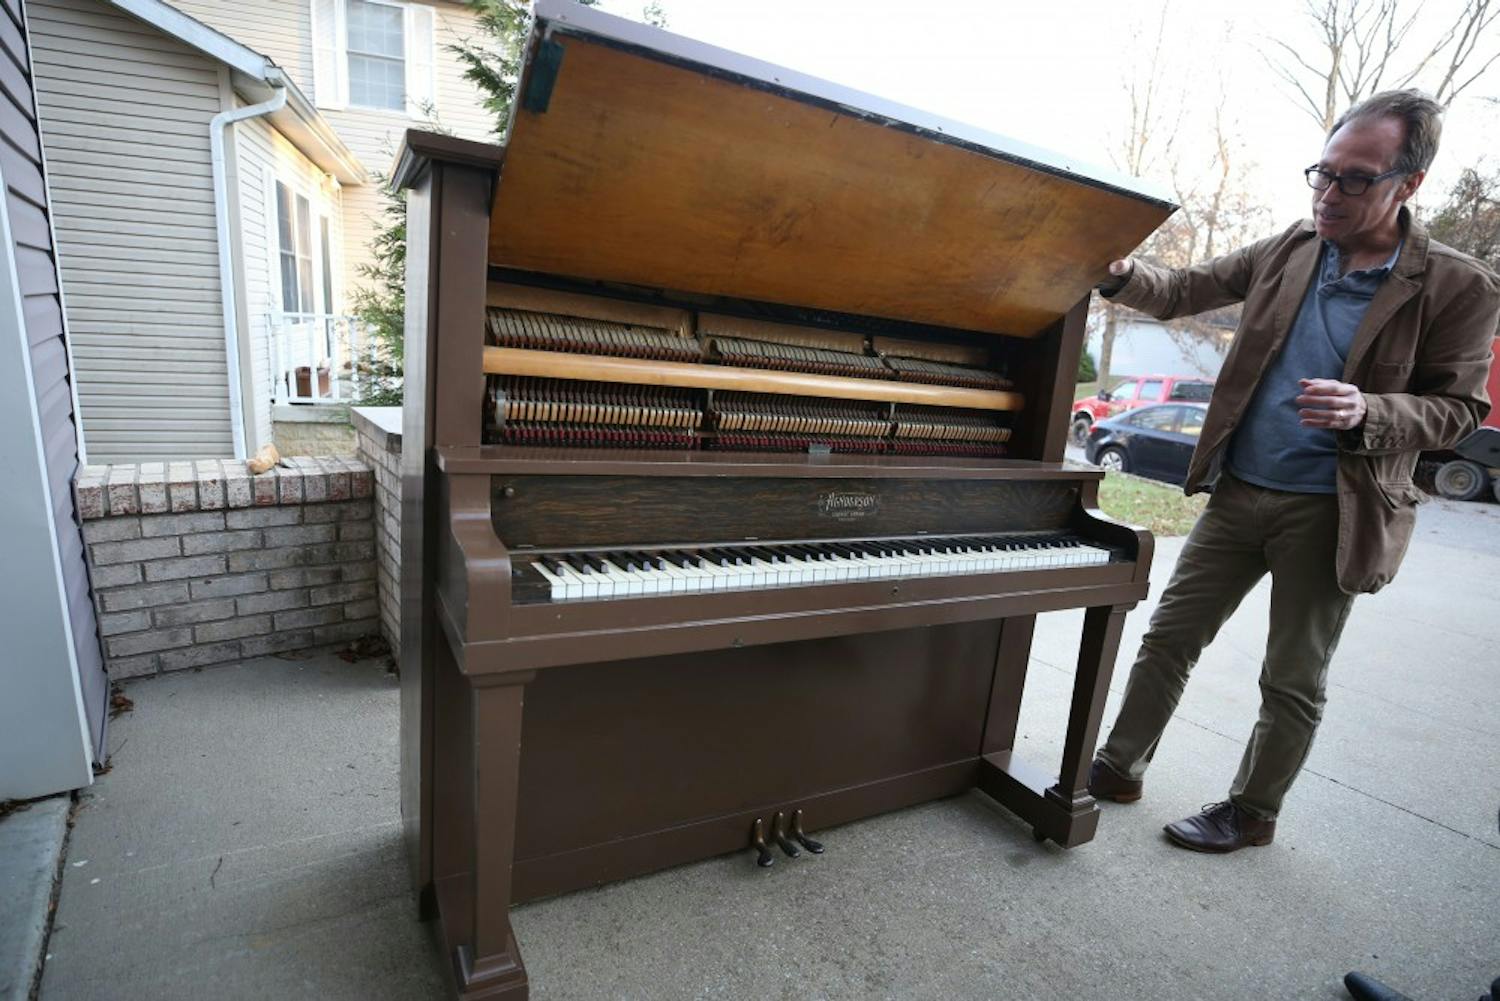 Jon Vickers, founding director of IU Cinema, stands next to the 1916 Henderson Piano that will be burnt Feb. 7 in Dunn Meadow. This performance will be free and open to the public.&nbsp;